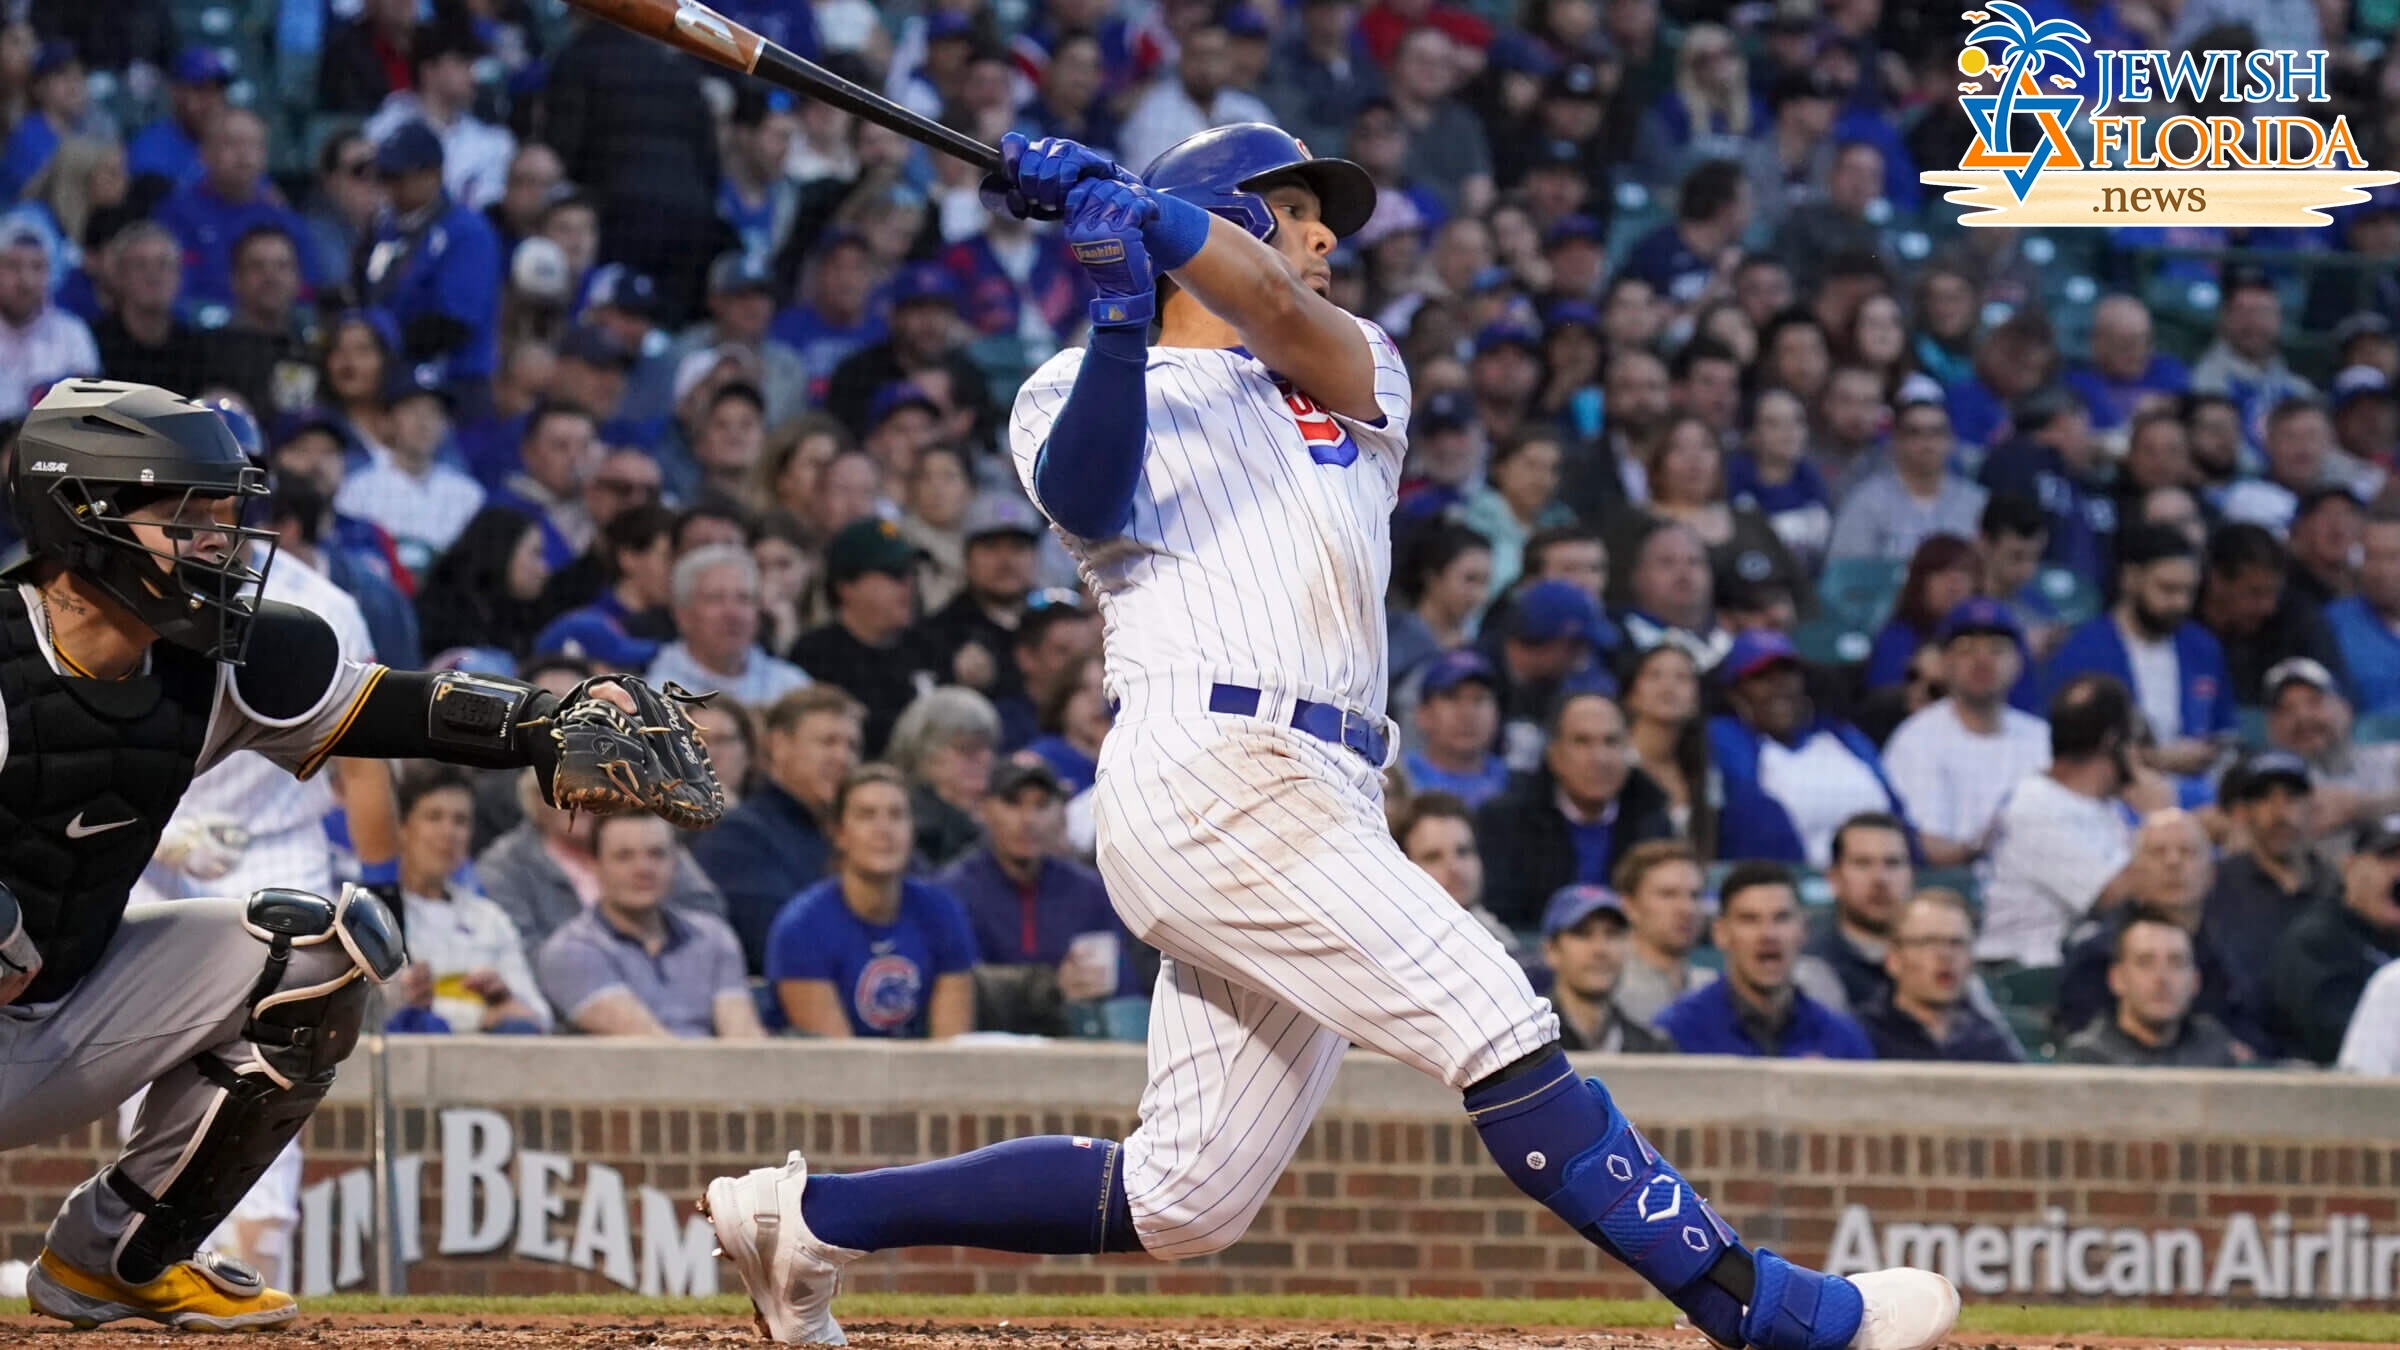 When this Cub walks up to the plate, ‘Thank You Hashem’ blasts across Wrigley Field